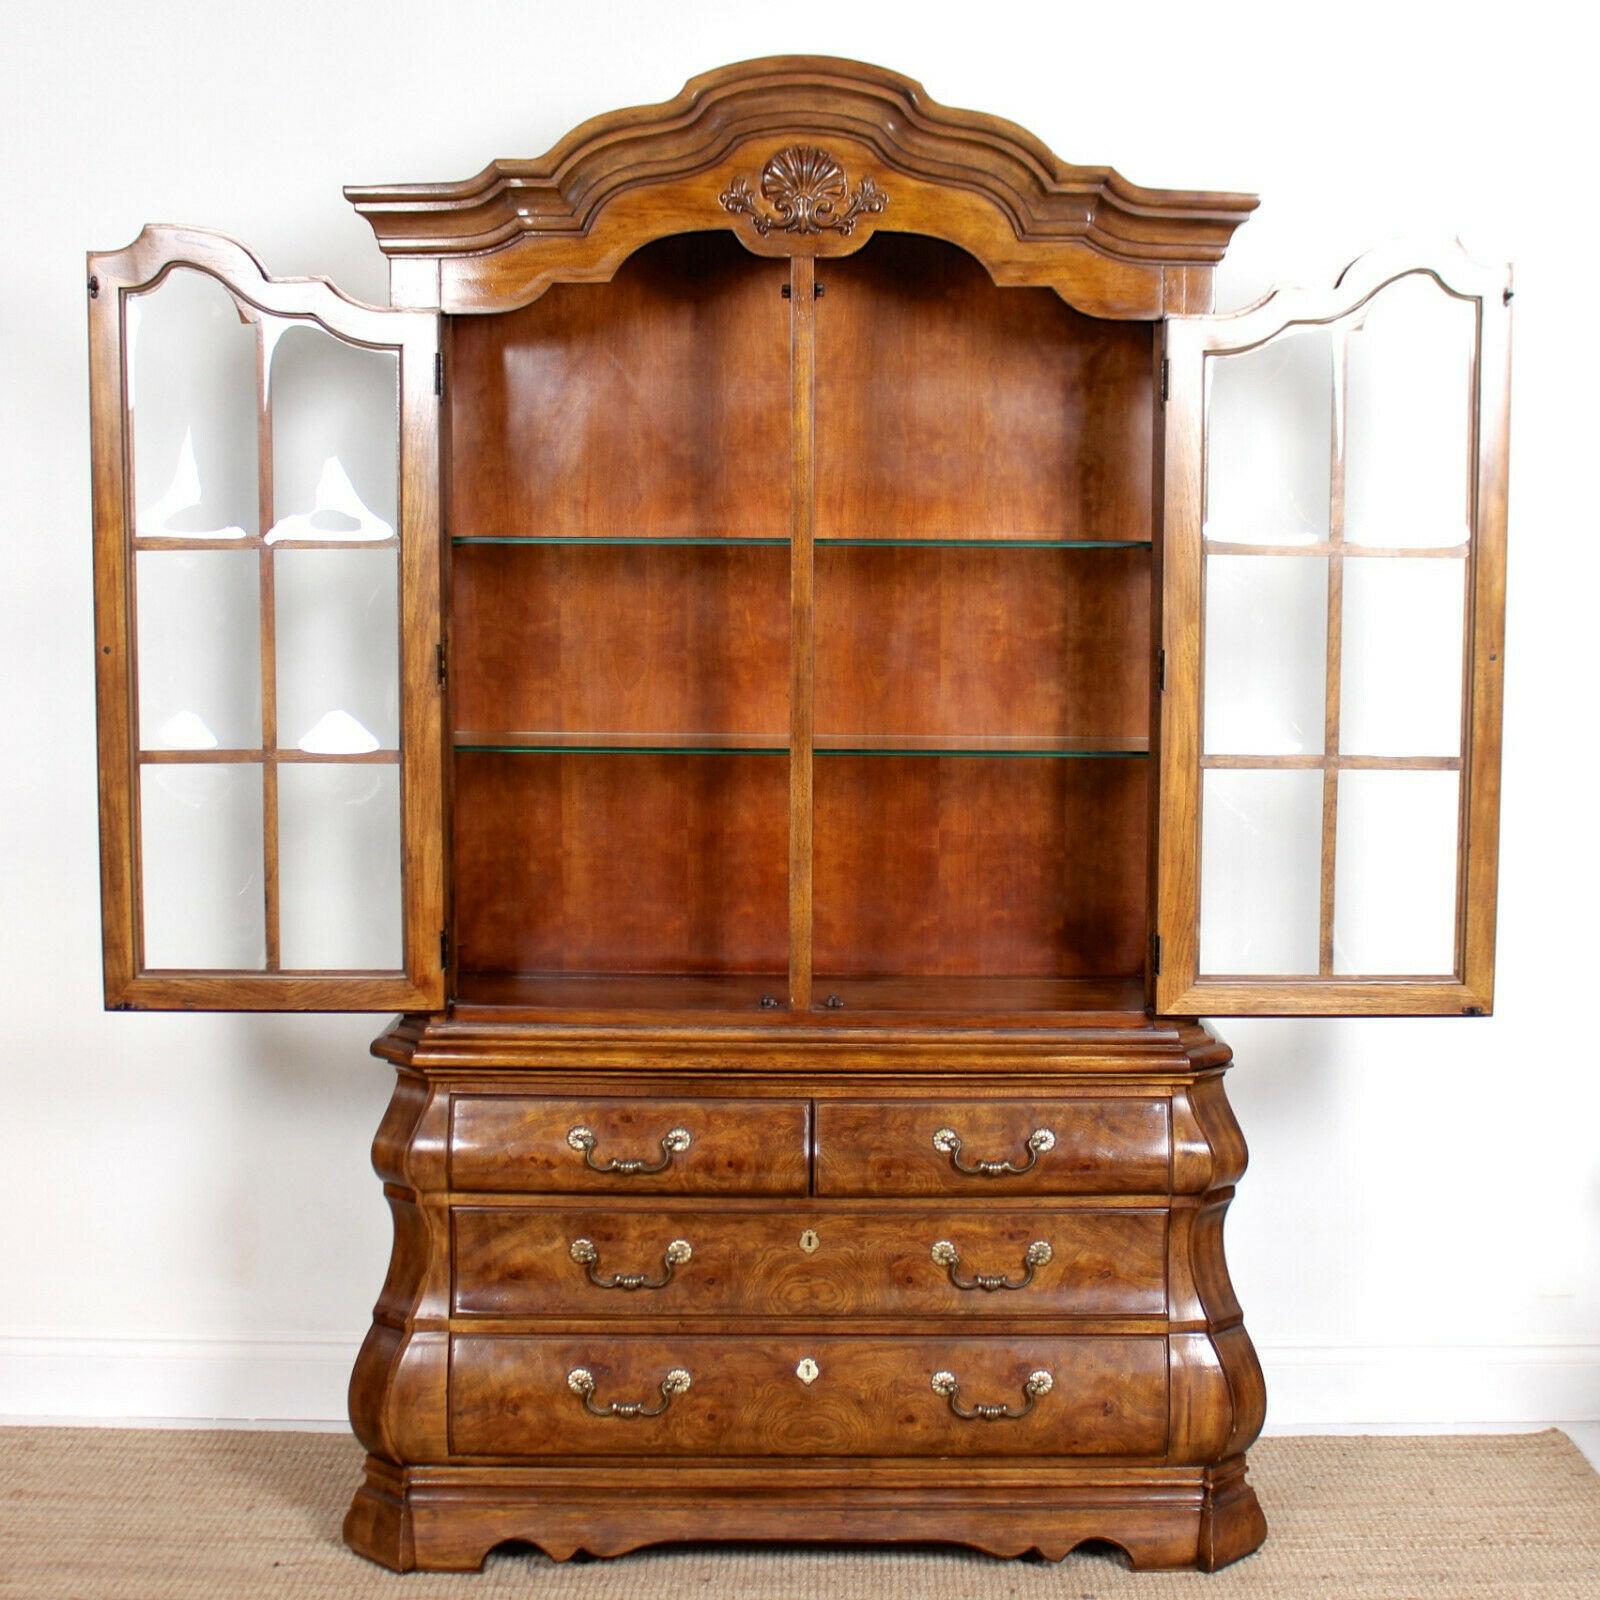 A fine quality spalted and figured burl elm glazed bombe display cabinet on chest by Drexel.

The upper section with arcaded moulded cornice and shell carved motif above bowed glazed paneled doors and ends enclosed interior lighting and glass